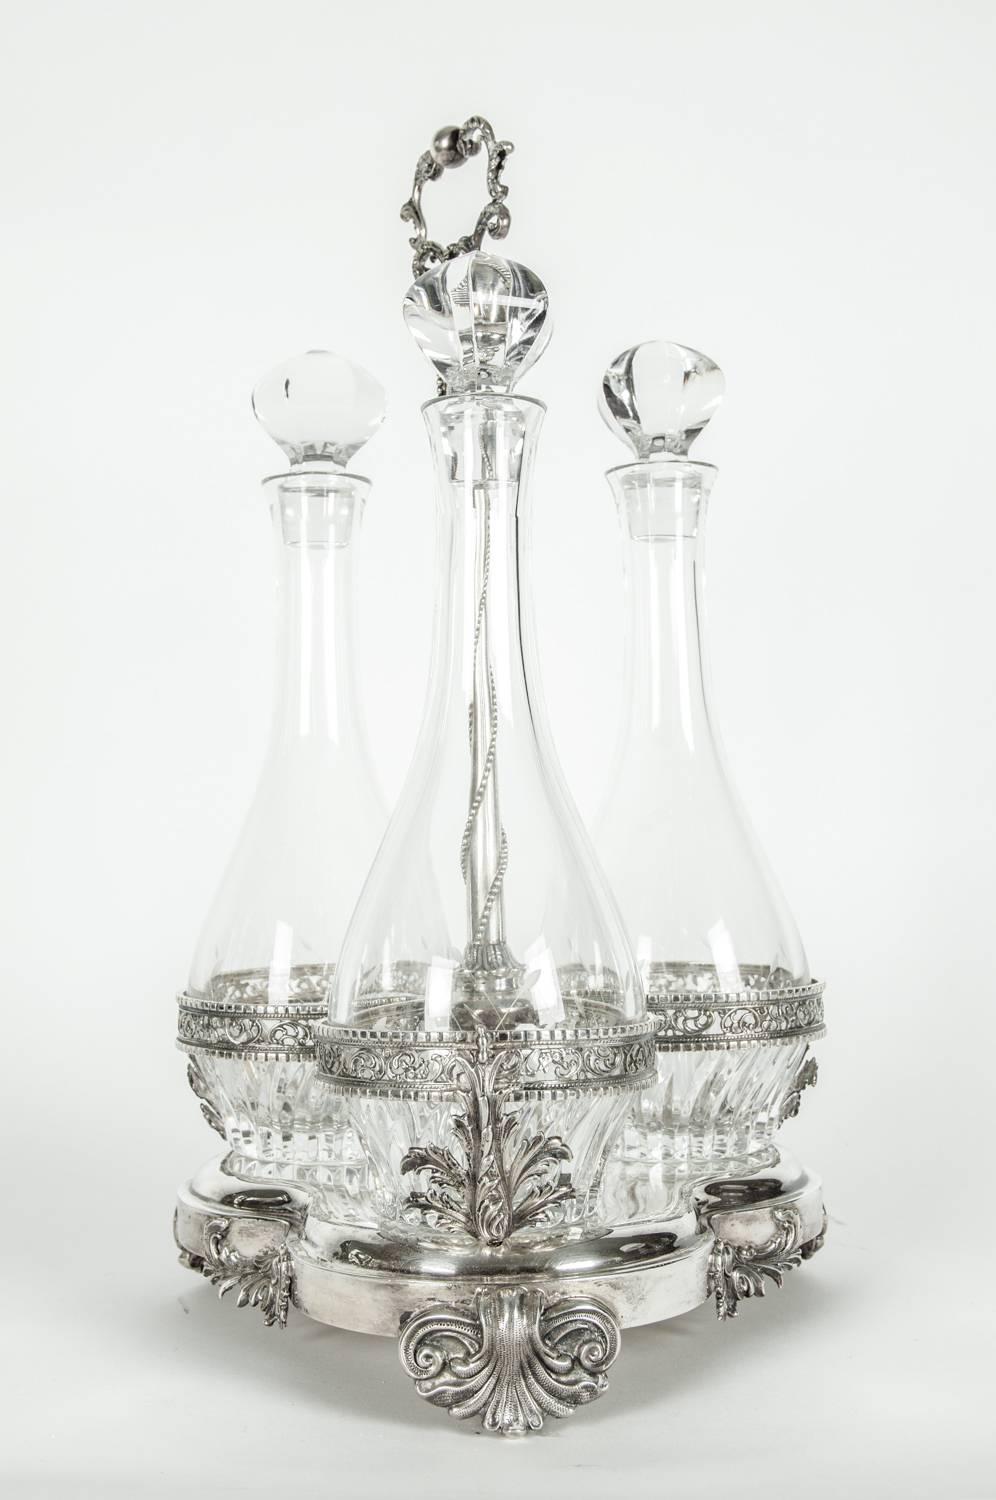 Large antique sterling silver trefoil form three cut crystal bottles decanter set in caddy. Each cut crystal decanter bottle is undersigned. The caddy is undersigned 